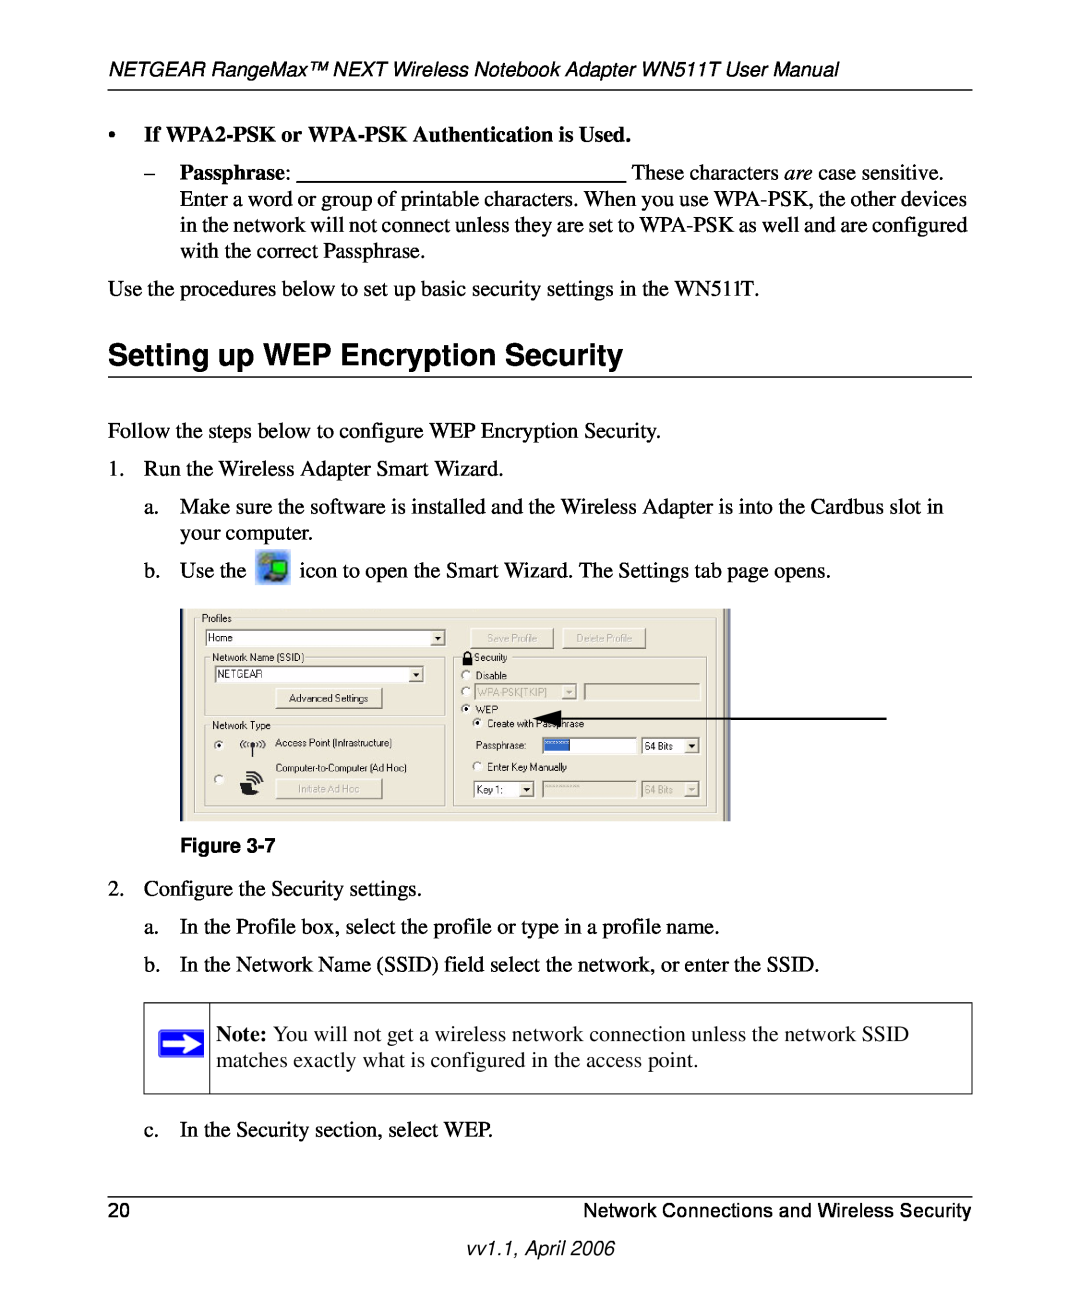 NETGEAR WN511T user manual Setting up WEP Encryption Security, If WPA2-PSK or WPA-PSK Authentication is Used 